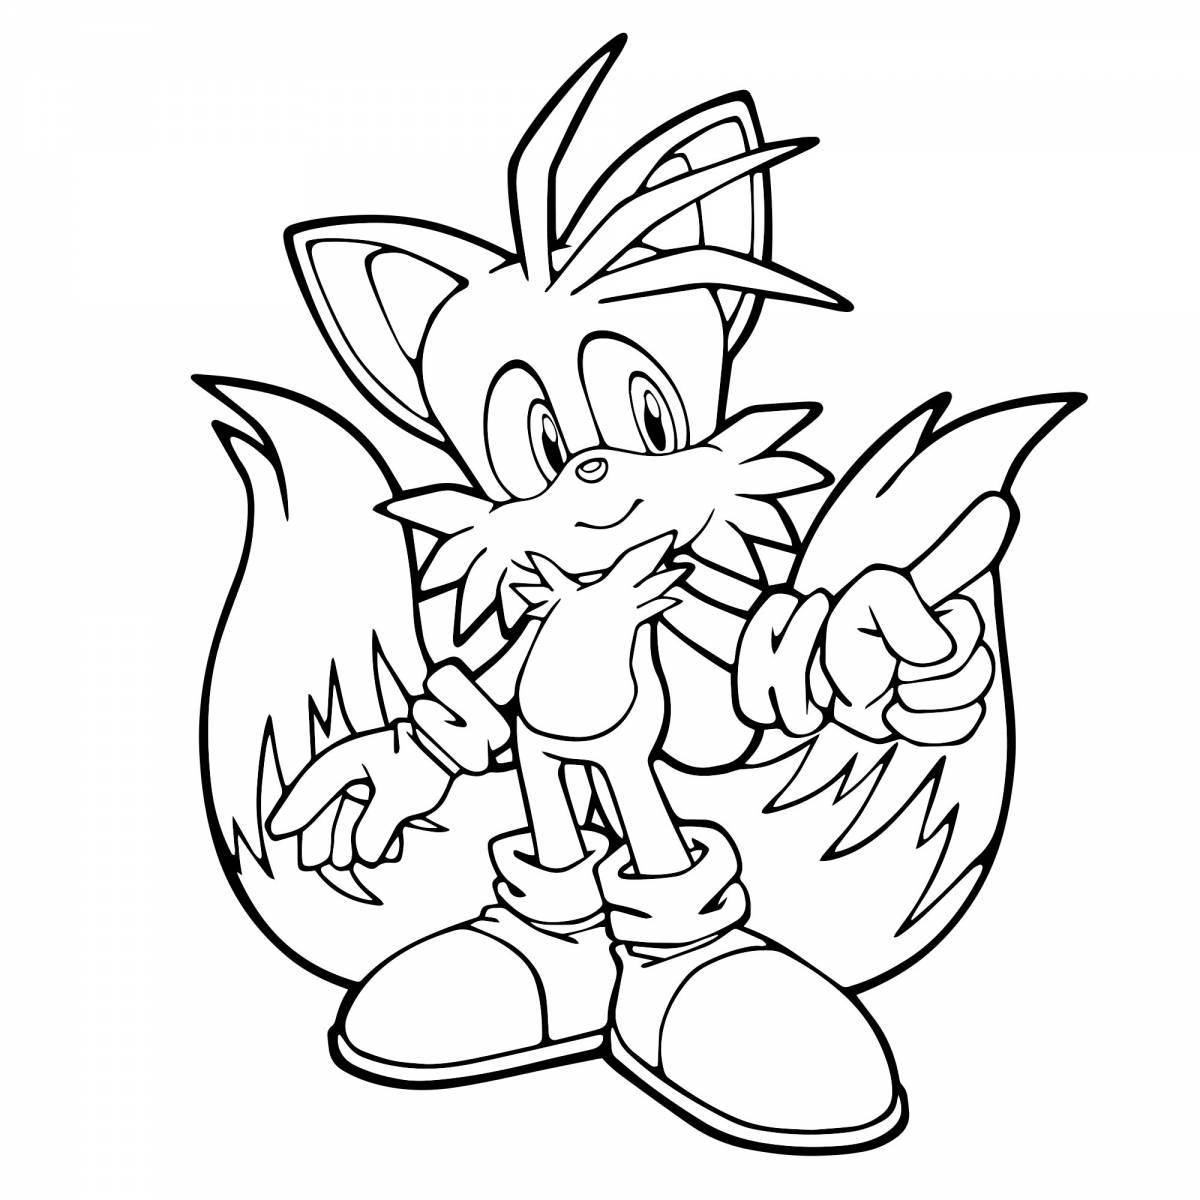 Attractive sonic drawing coloring book